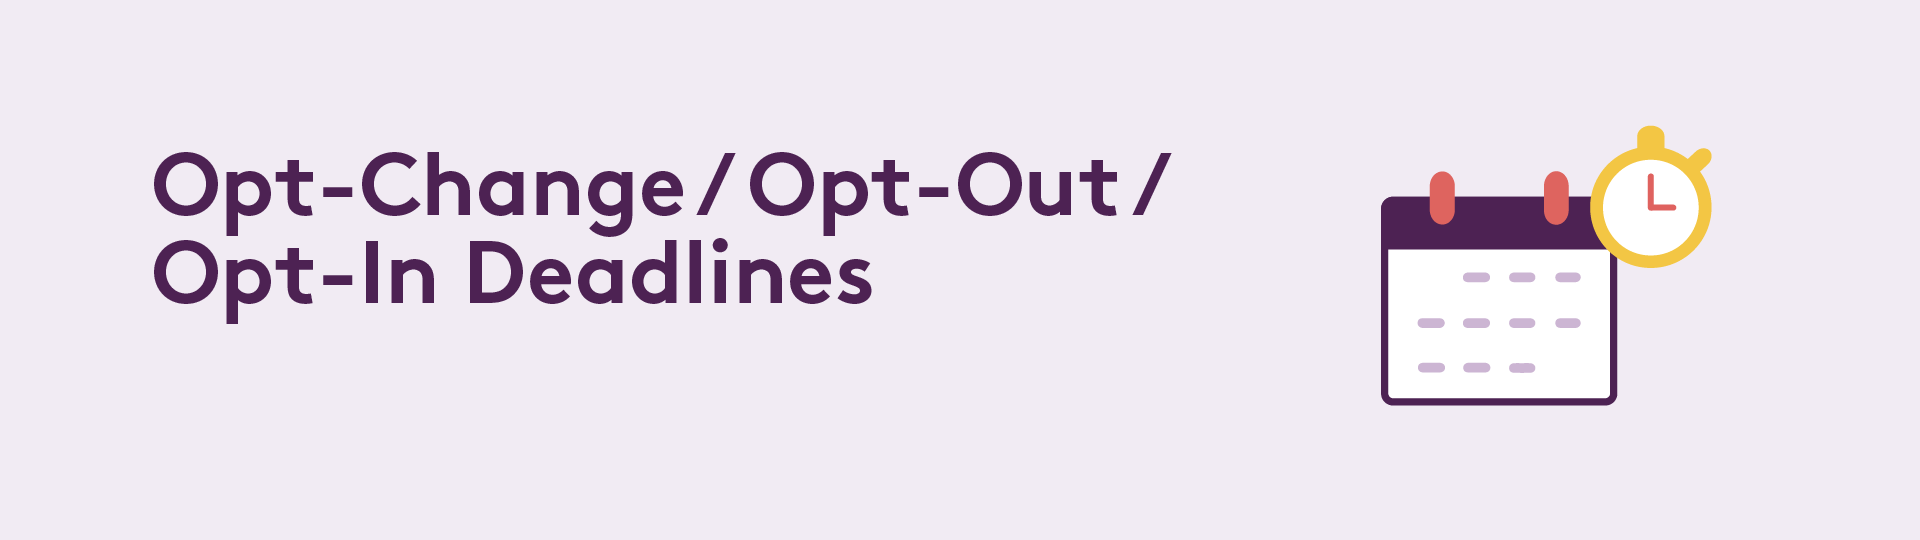 Opt/out/change/deadlines